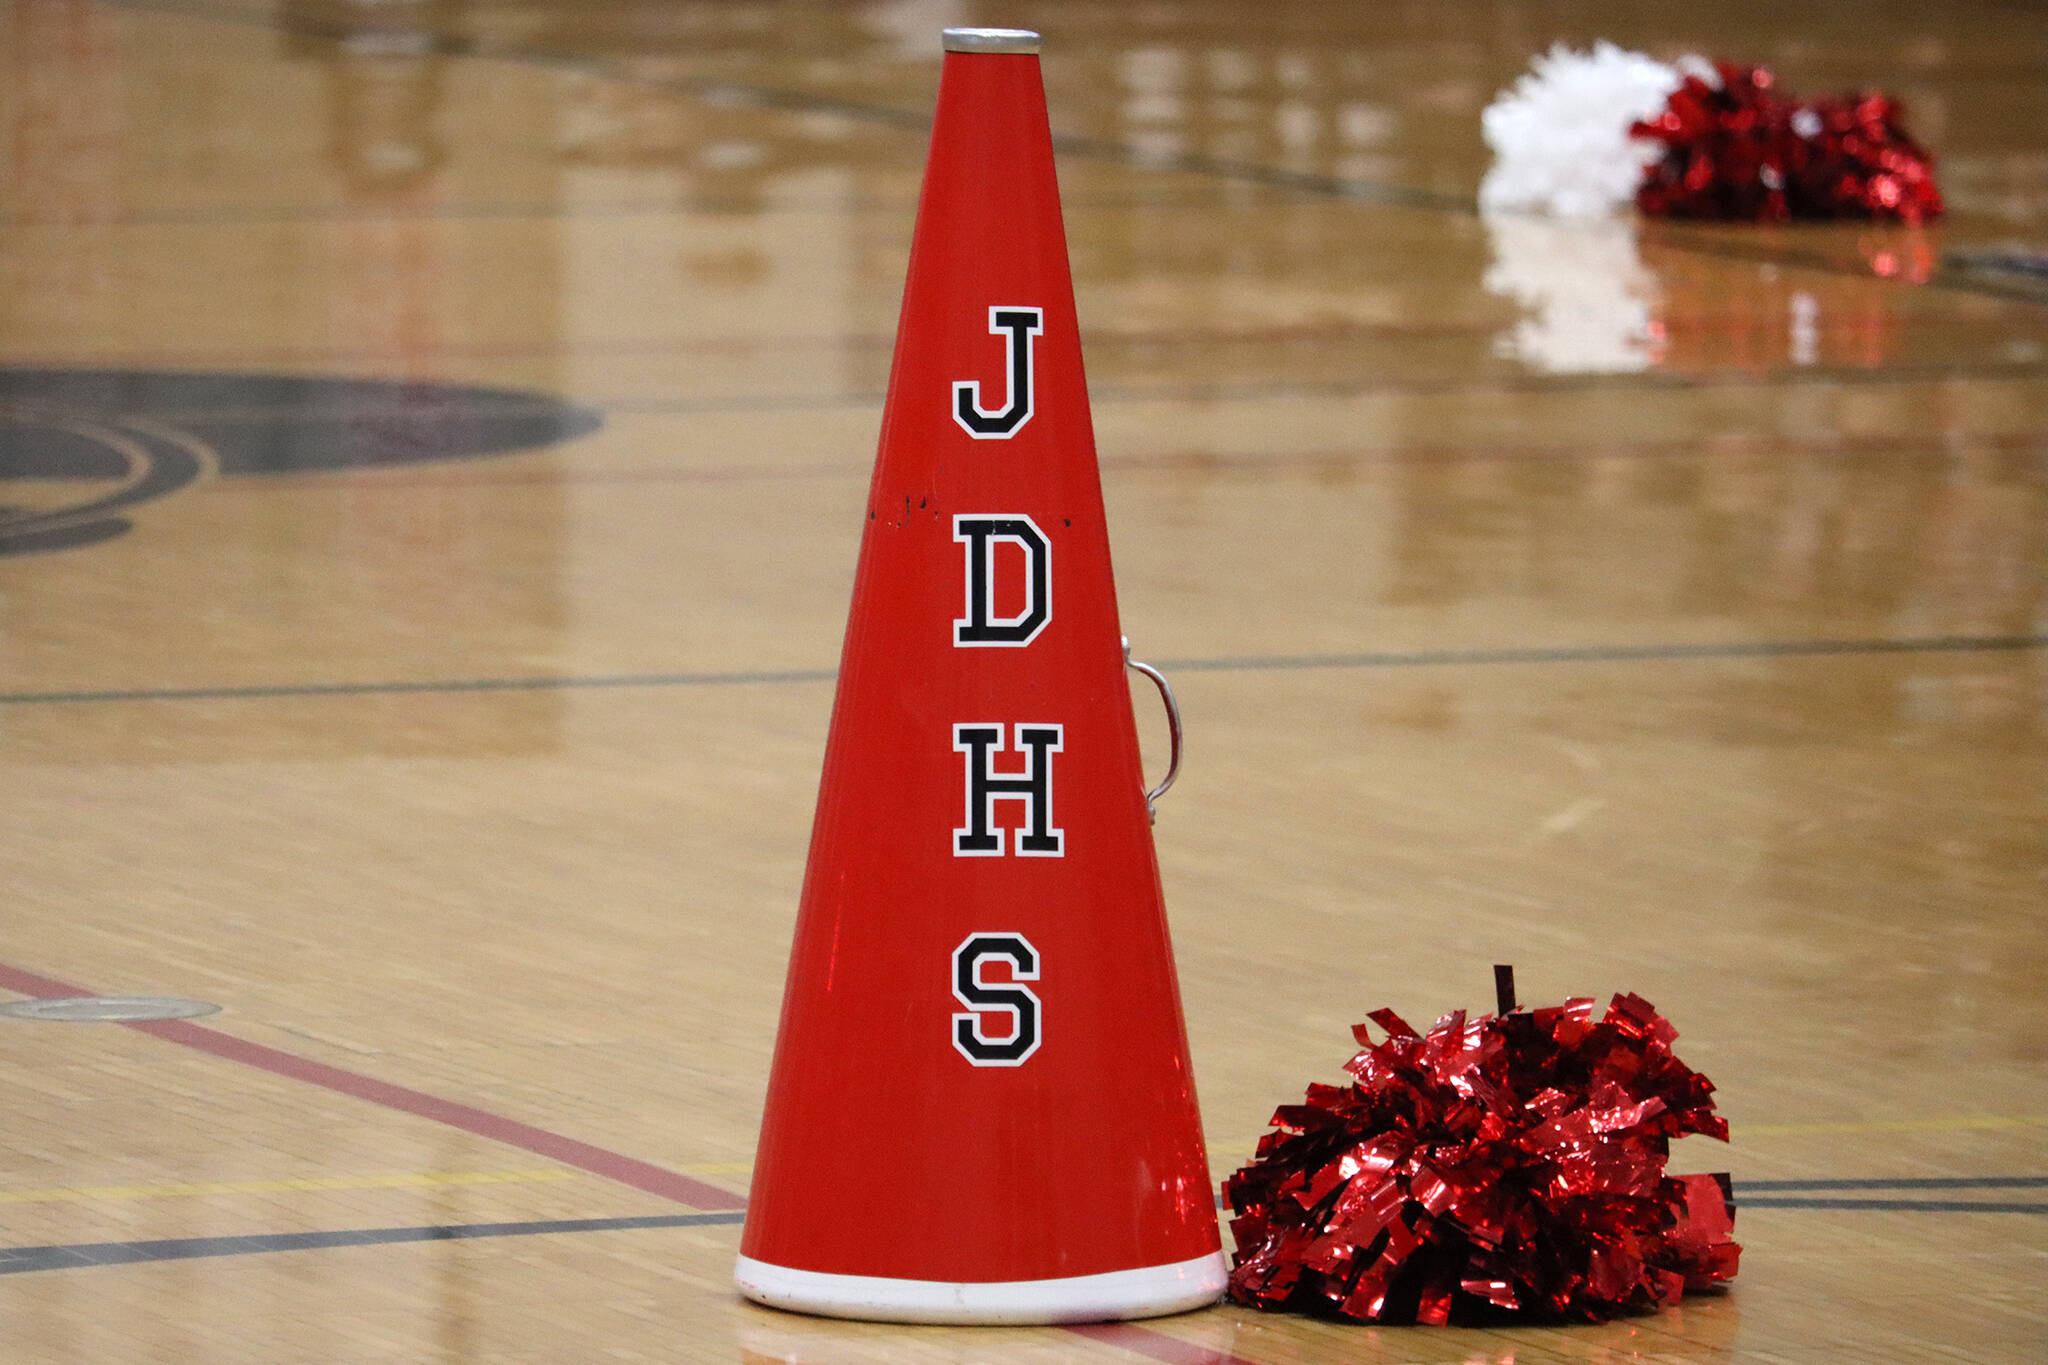 The JDHS boys basketball team won its second game of the season Wednesday. The Crimson Bears have more tournament games in their future — both in Las Vegas and at home. (Ben Hohenstatt / Juneau Empire File)